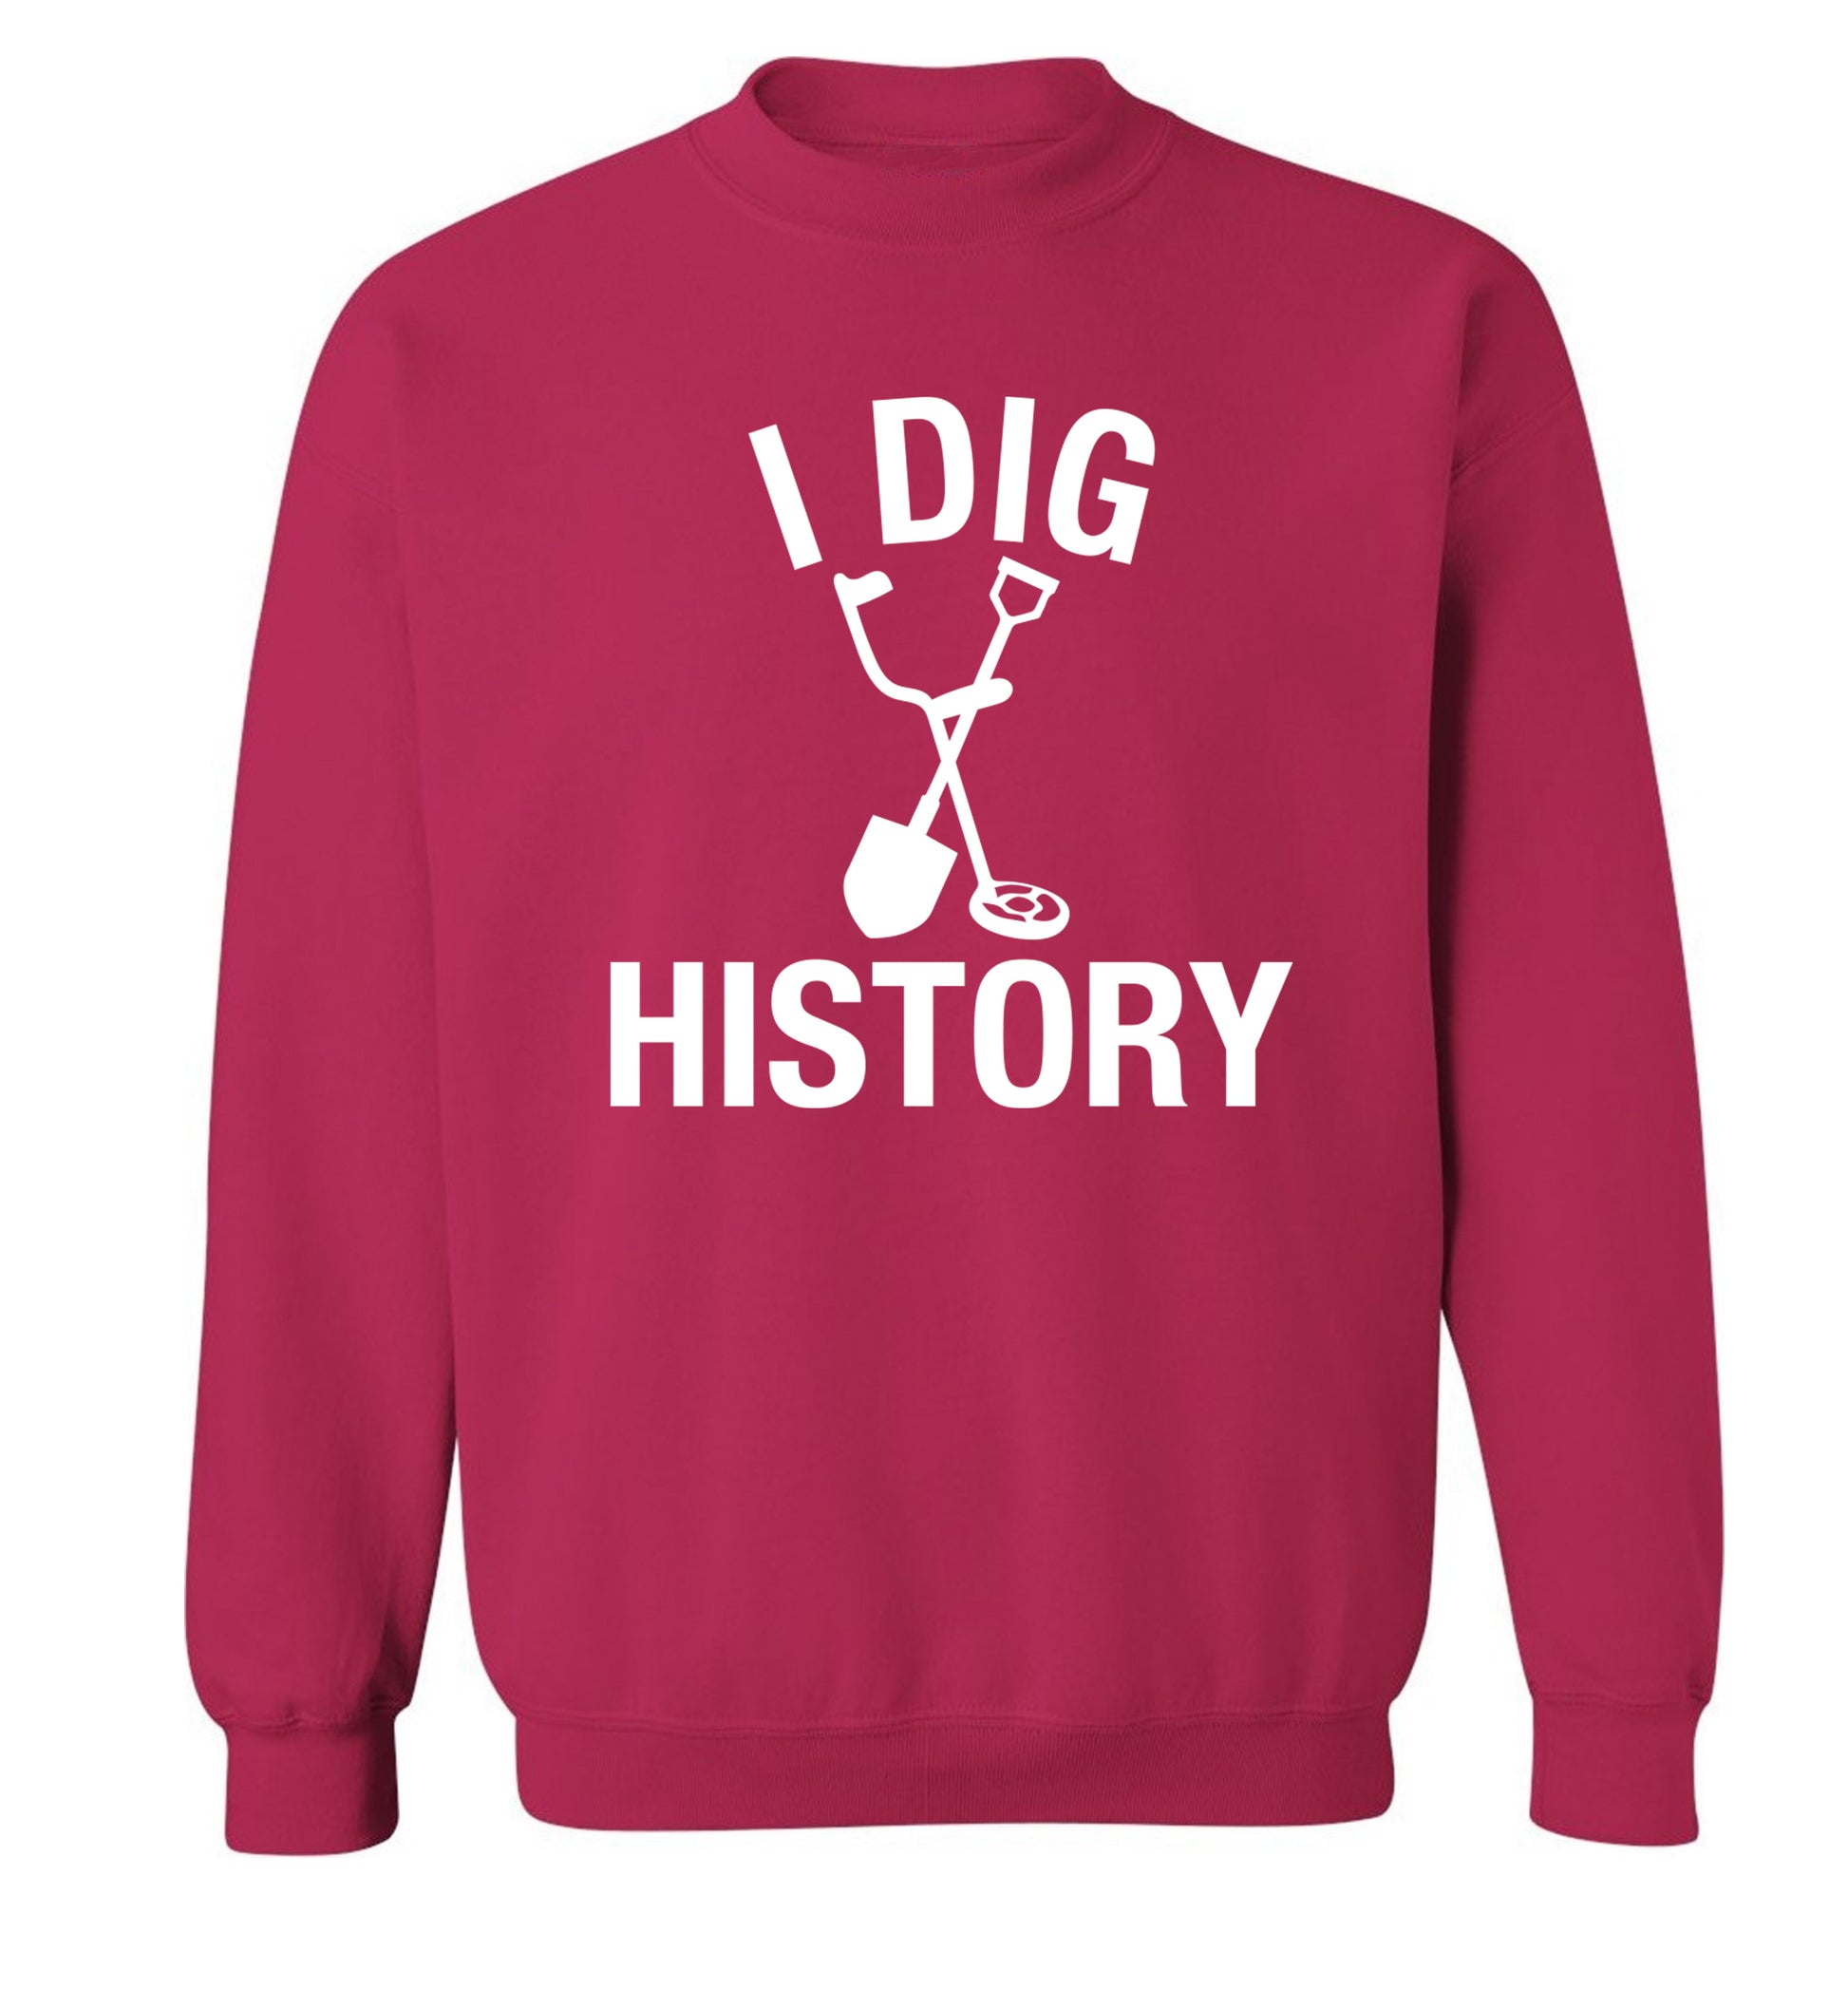 I dig history Adult's unisex pink Sweater 2XL